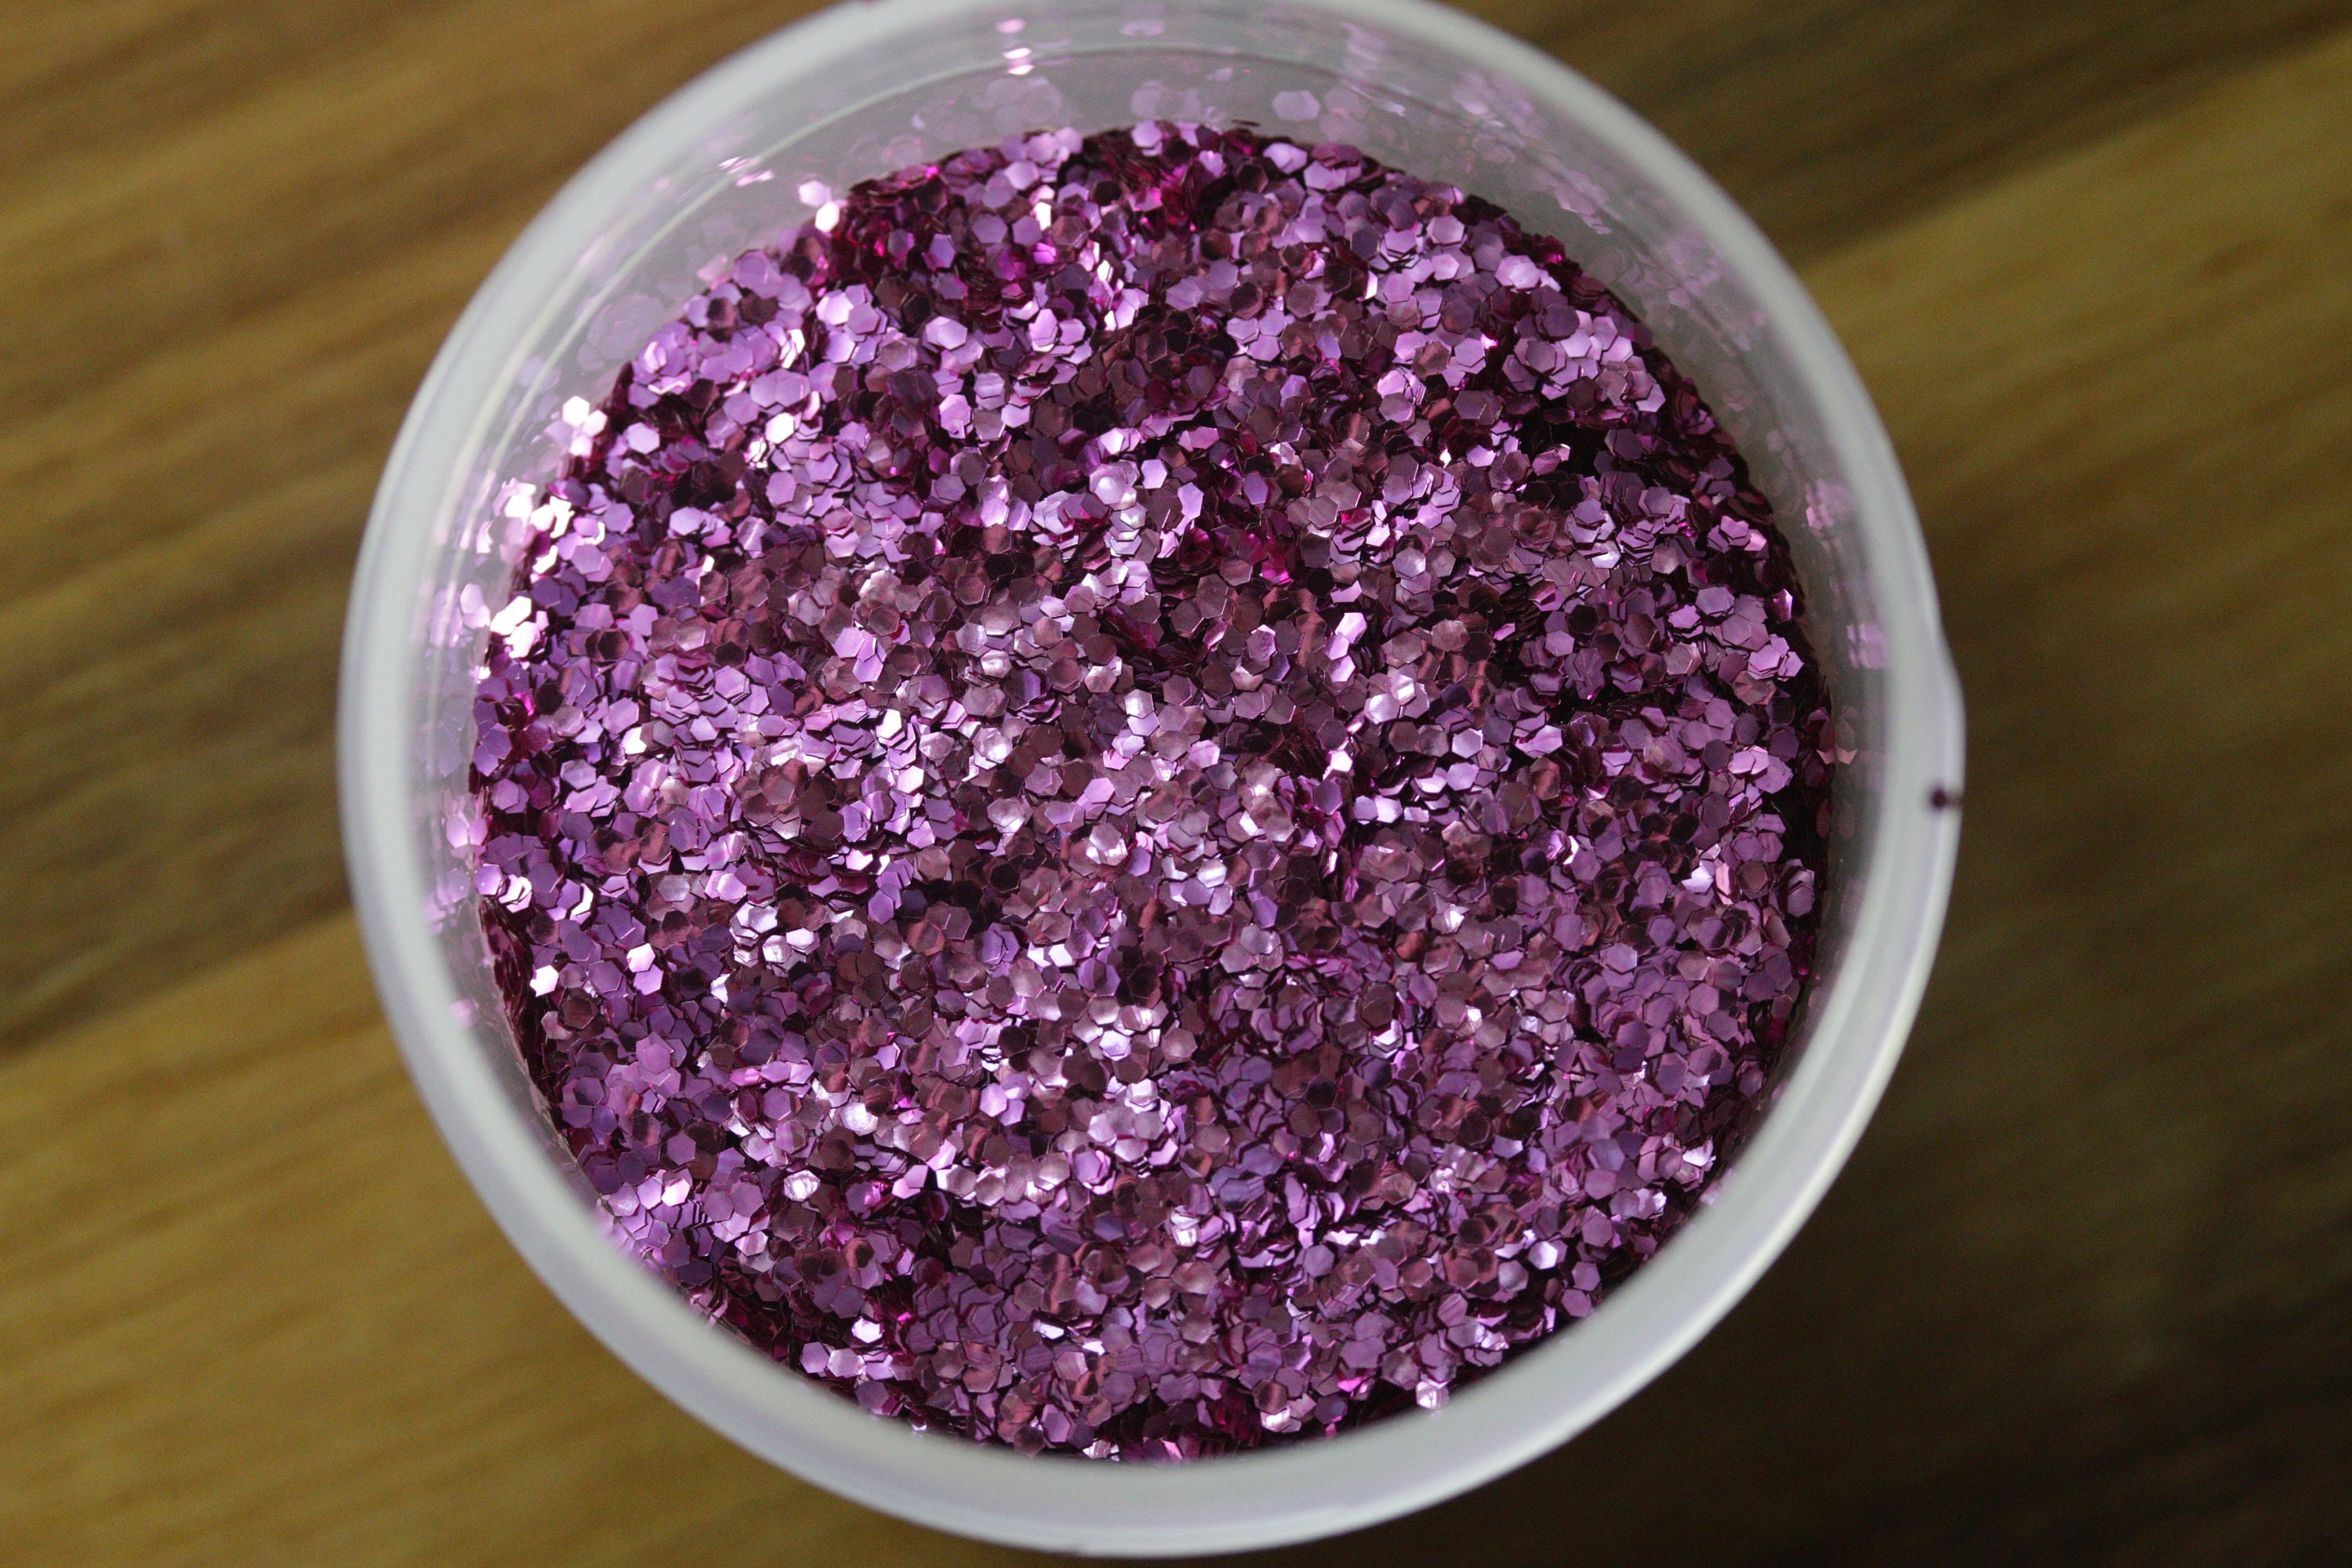 Princess Pink Chunky Biodegradable Glitter, Made in the Non Toxic, Cruelty Free, 1oz